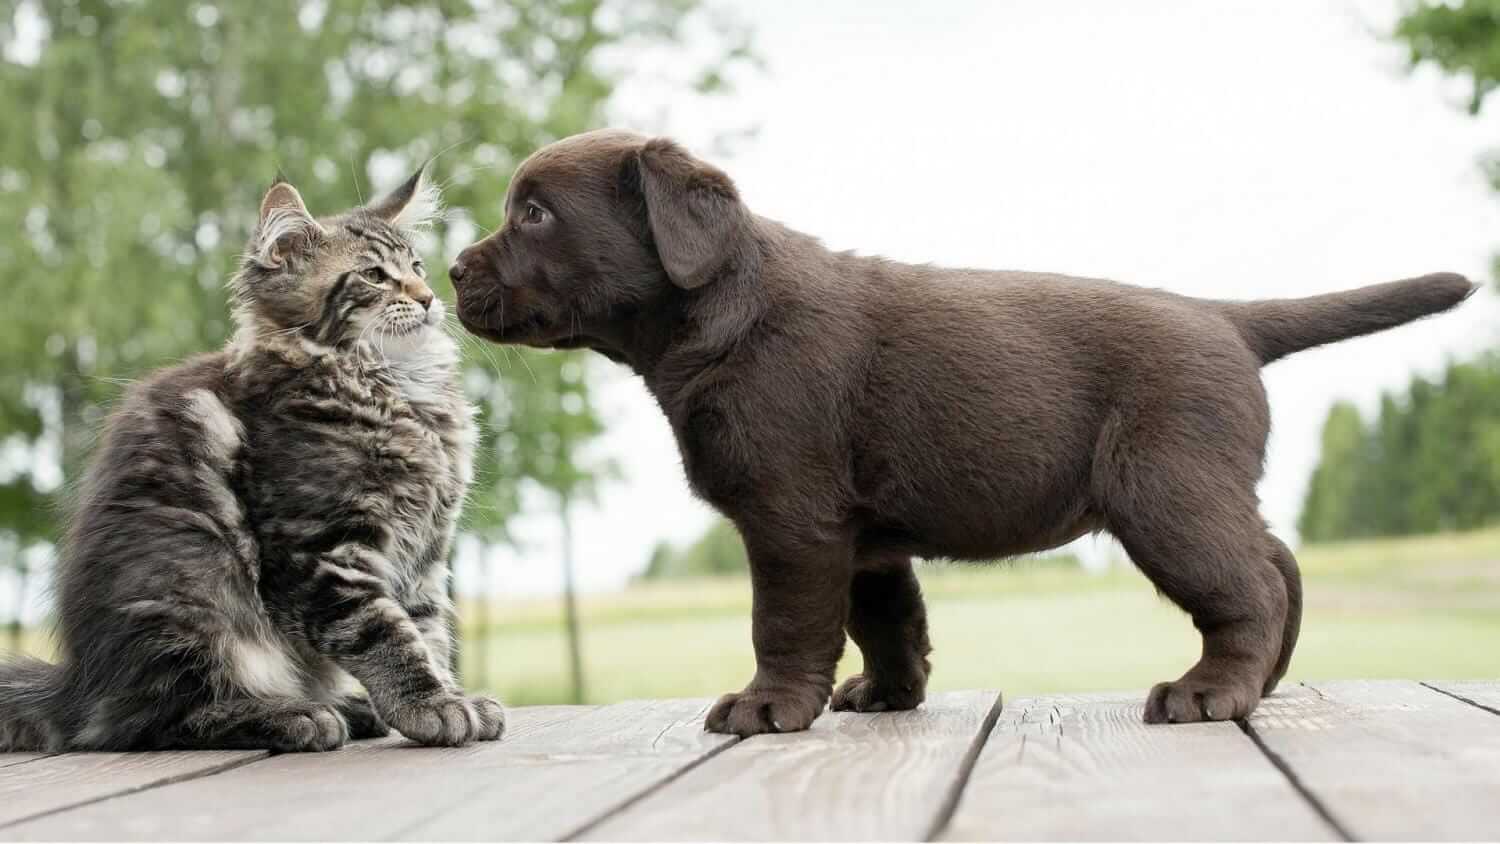 How You Make Dog and Cat To Get Along